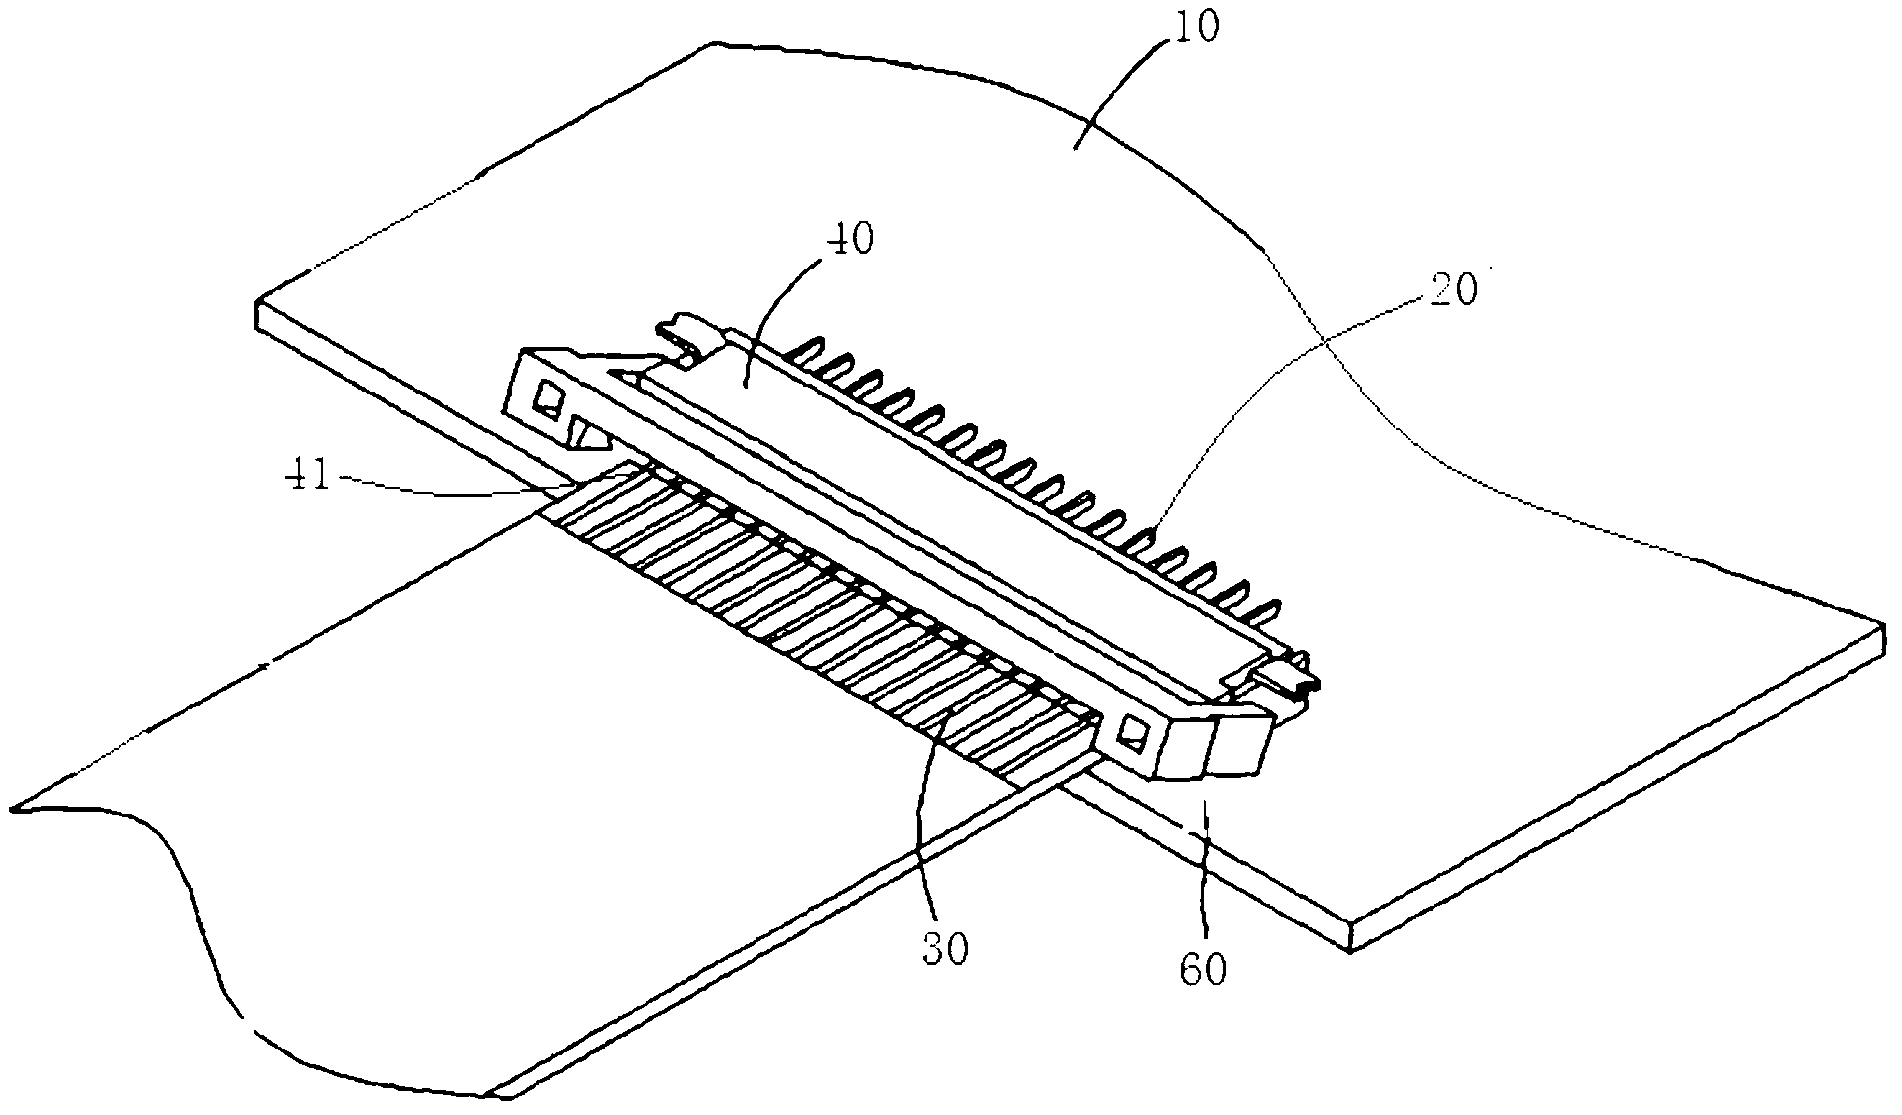 Flexible printed circuit board connection terminal and flexible printed circuit board